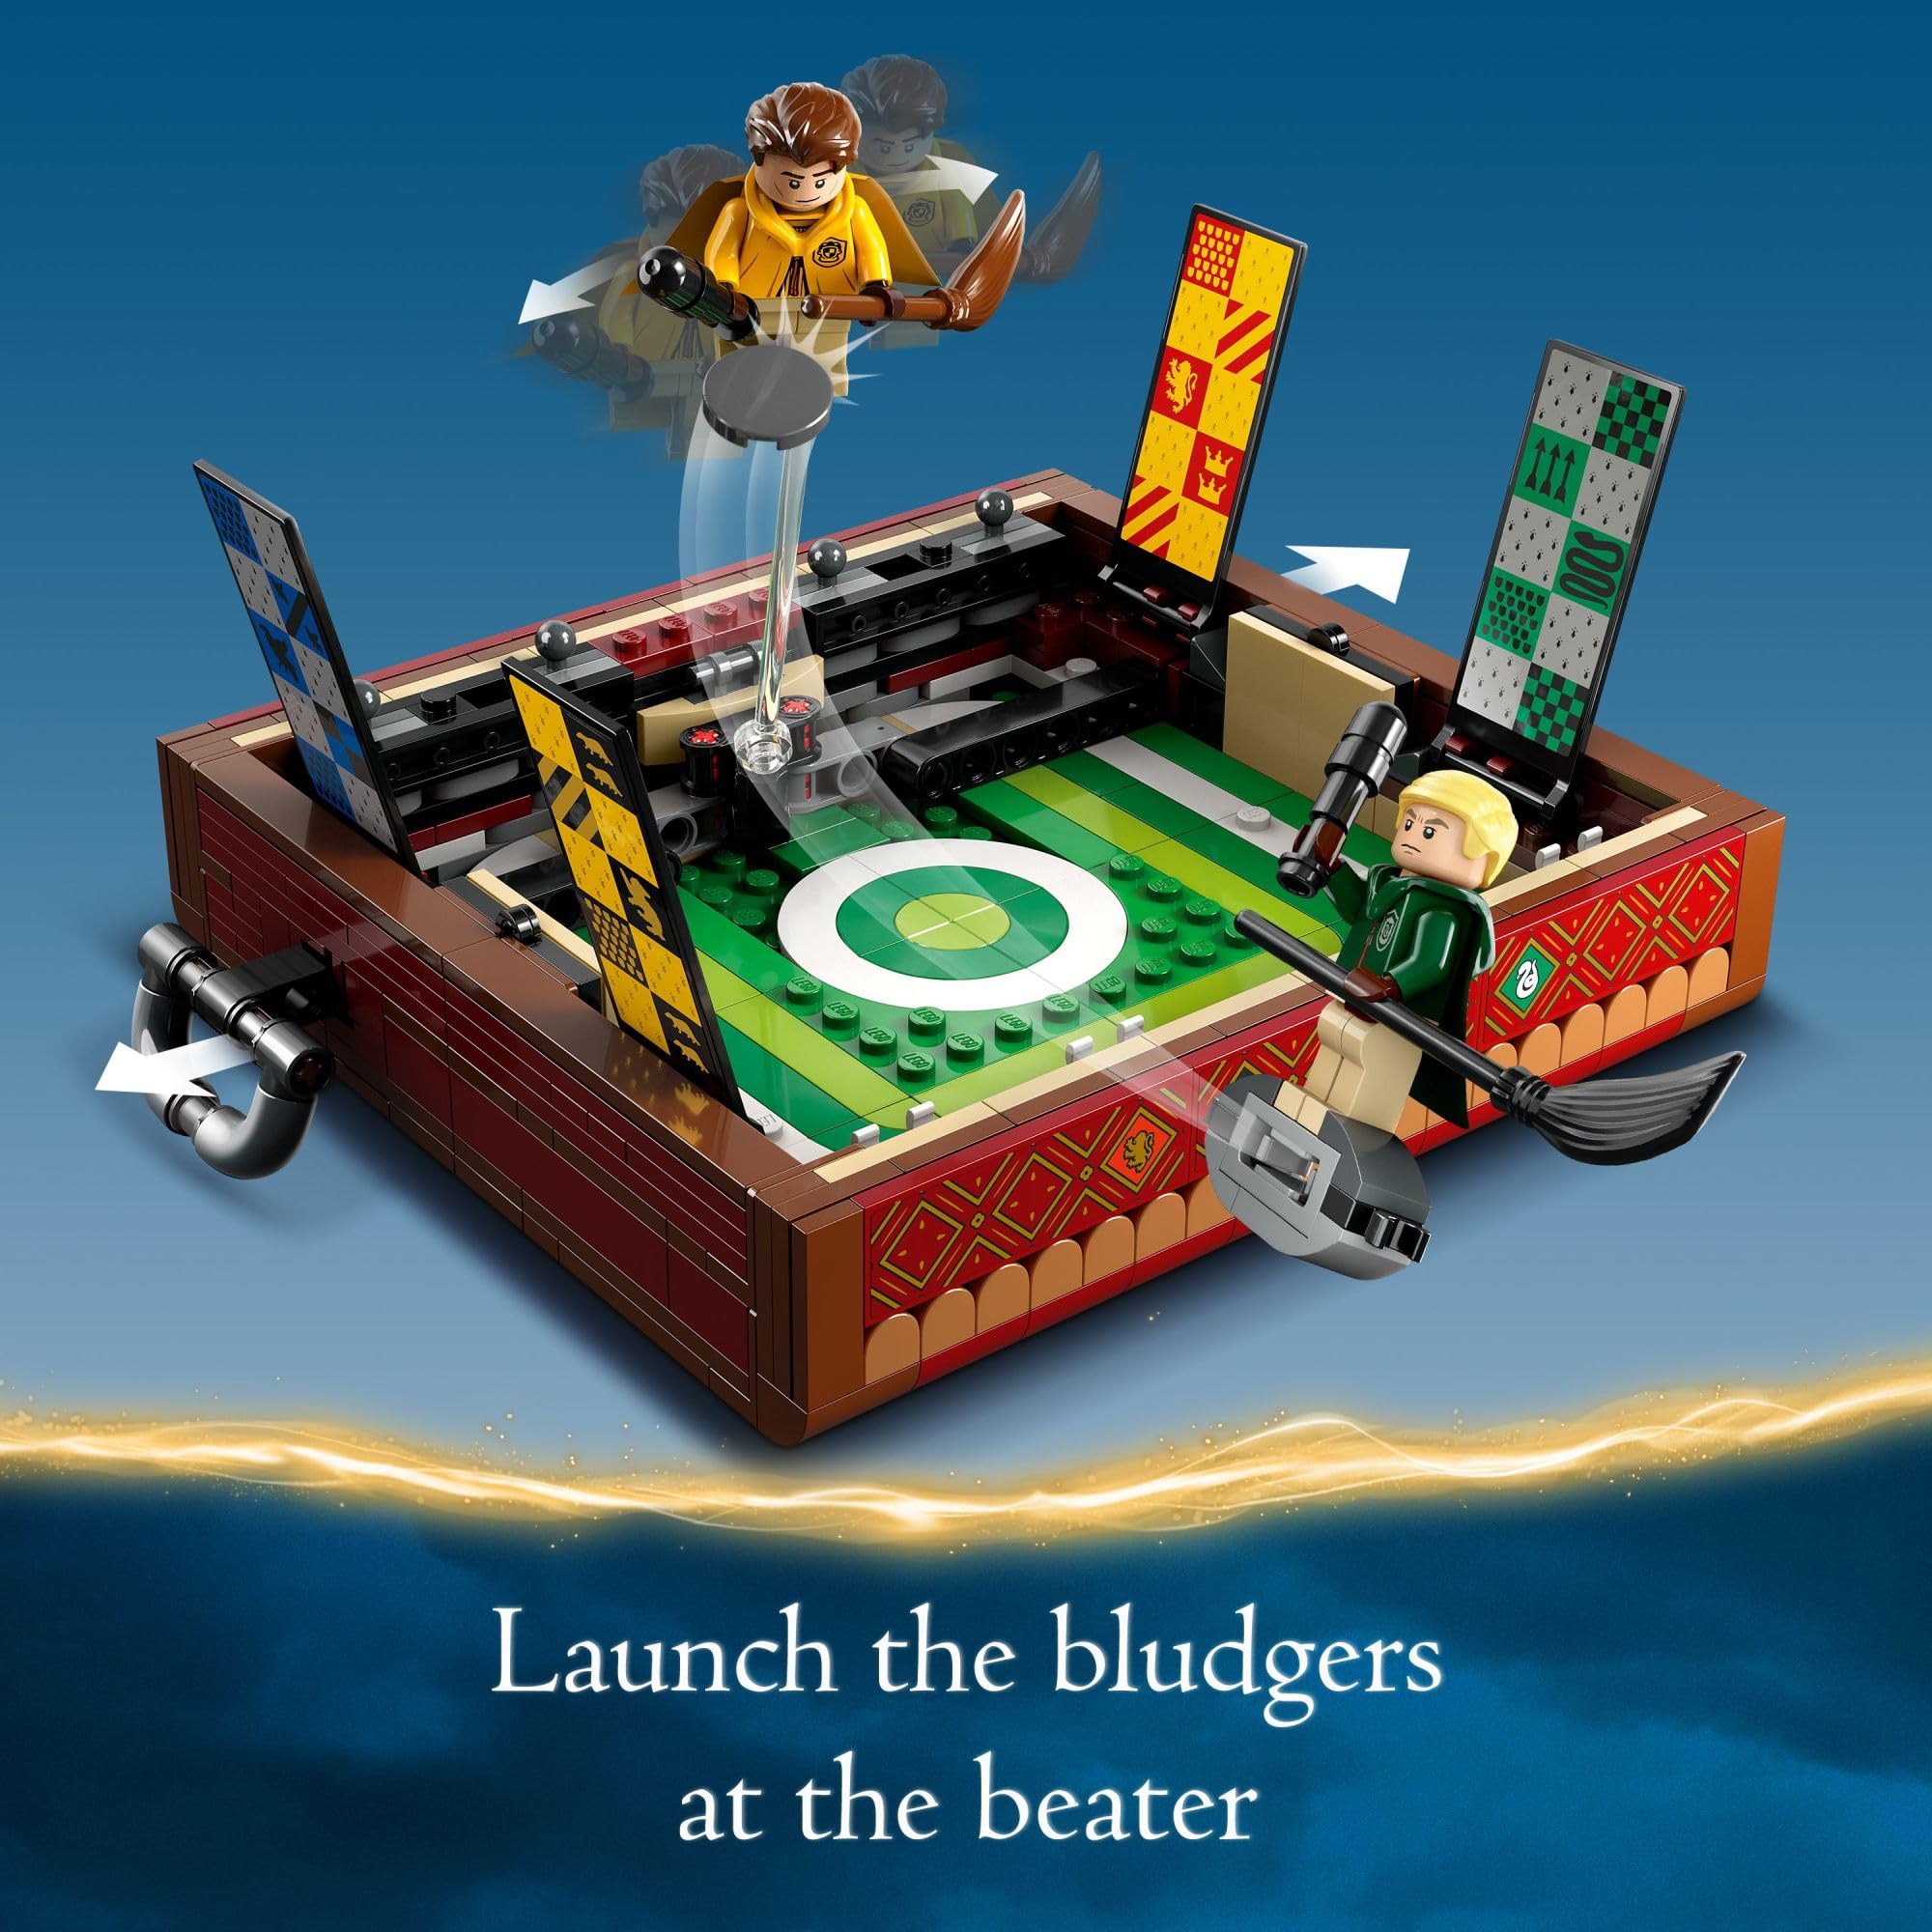 LEGO Harry Potter Quidditch Trunk 76416 Buildable Harry Potter Toy; Birthday Gift Idea for Kids Aged 9+; Open the Buildable Box to Reveal a Quidditch Playing Arena; Includes 4 Customizable Minifigures